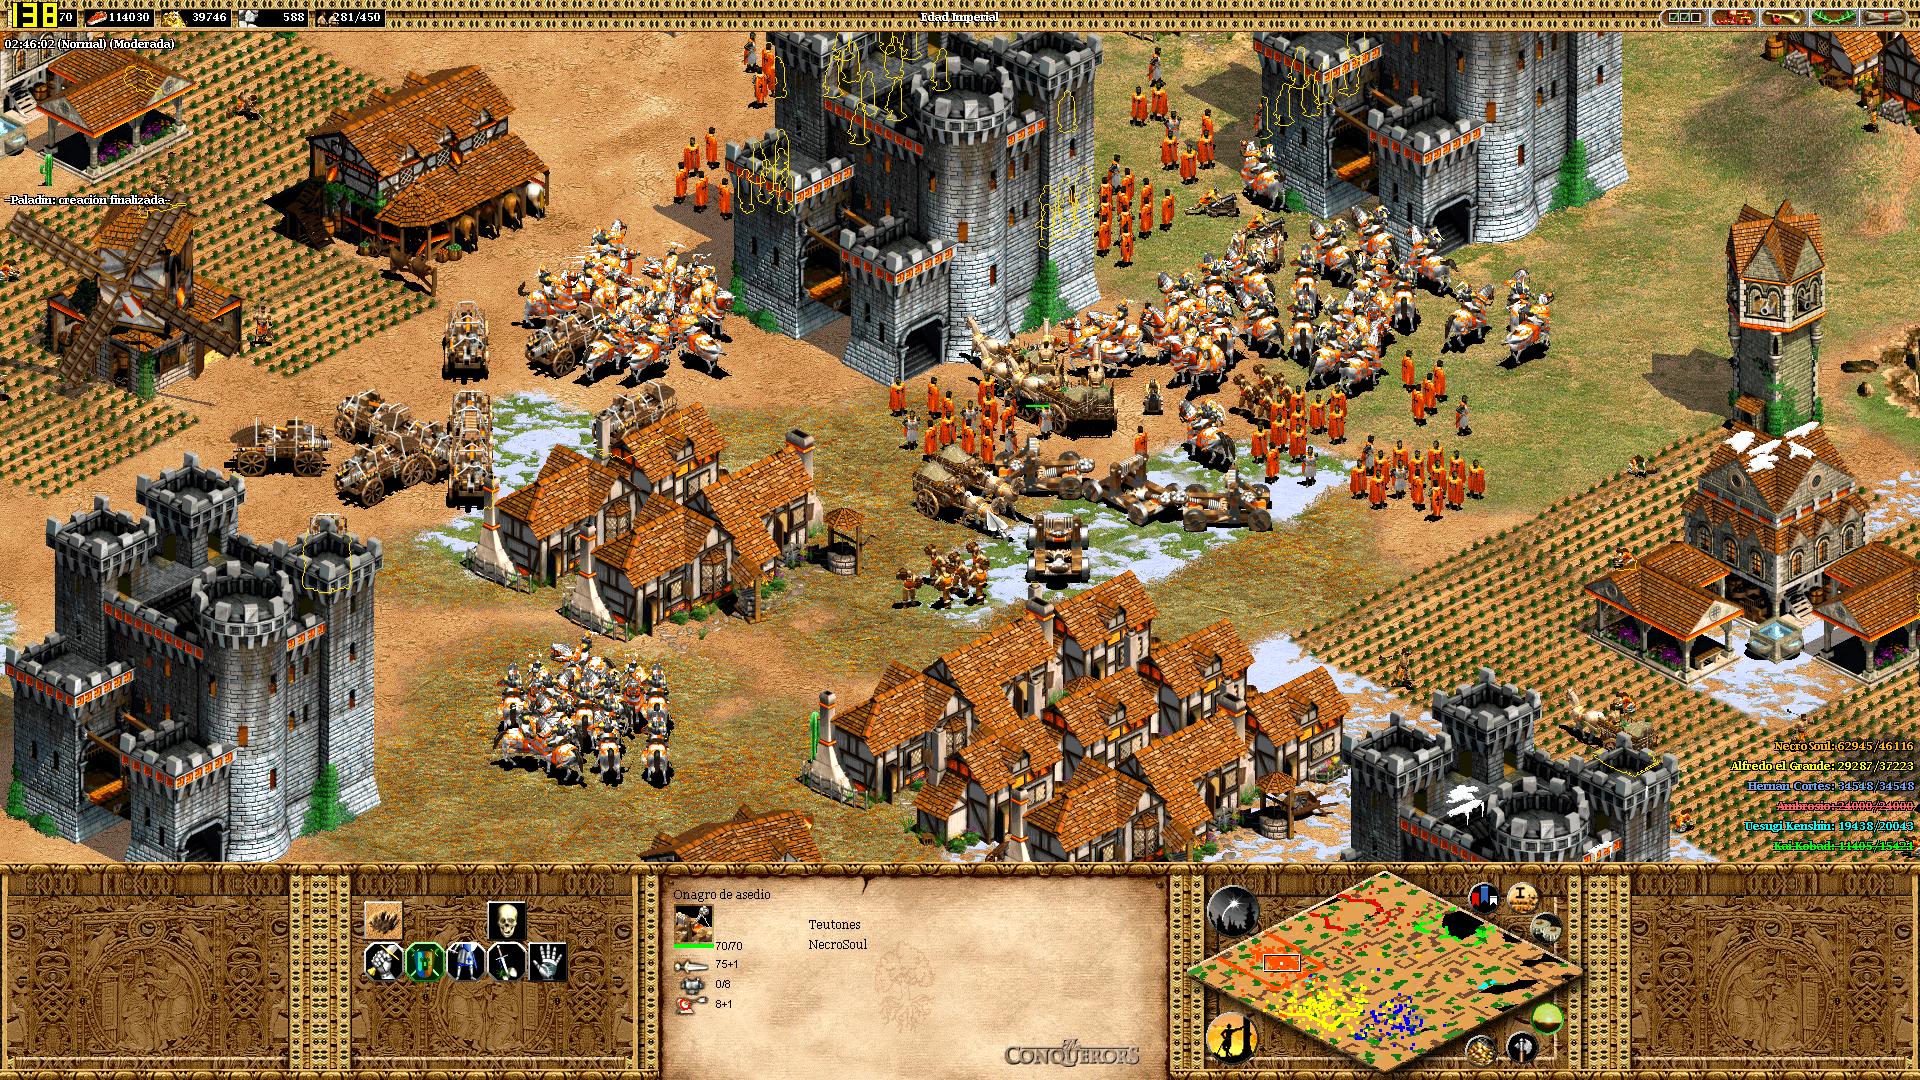 What We Want See From Age Of Empires IV